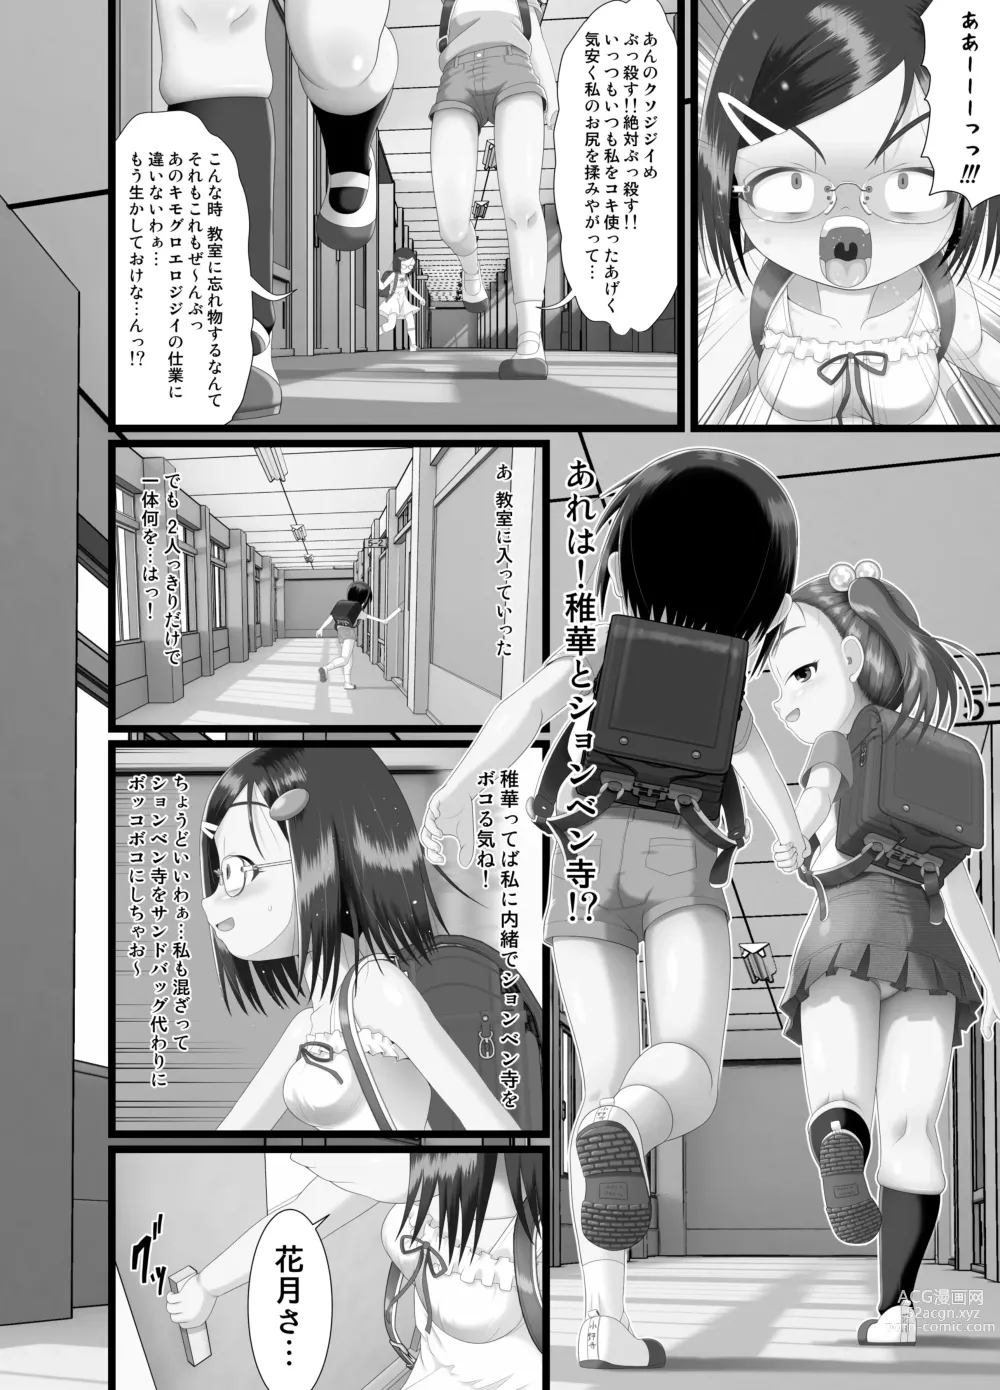 Page 6 of doujinshi Sanistand #4